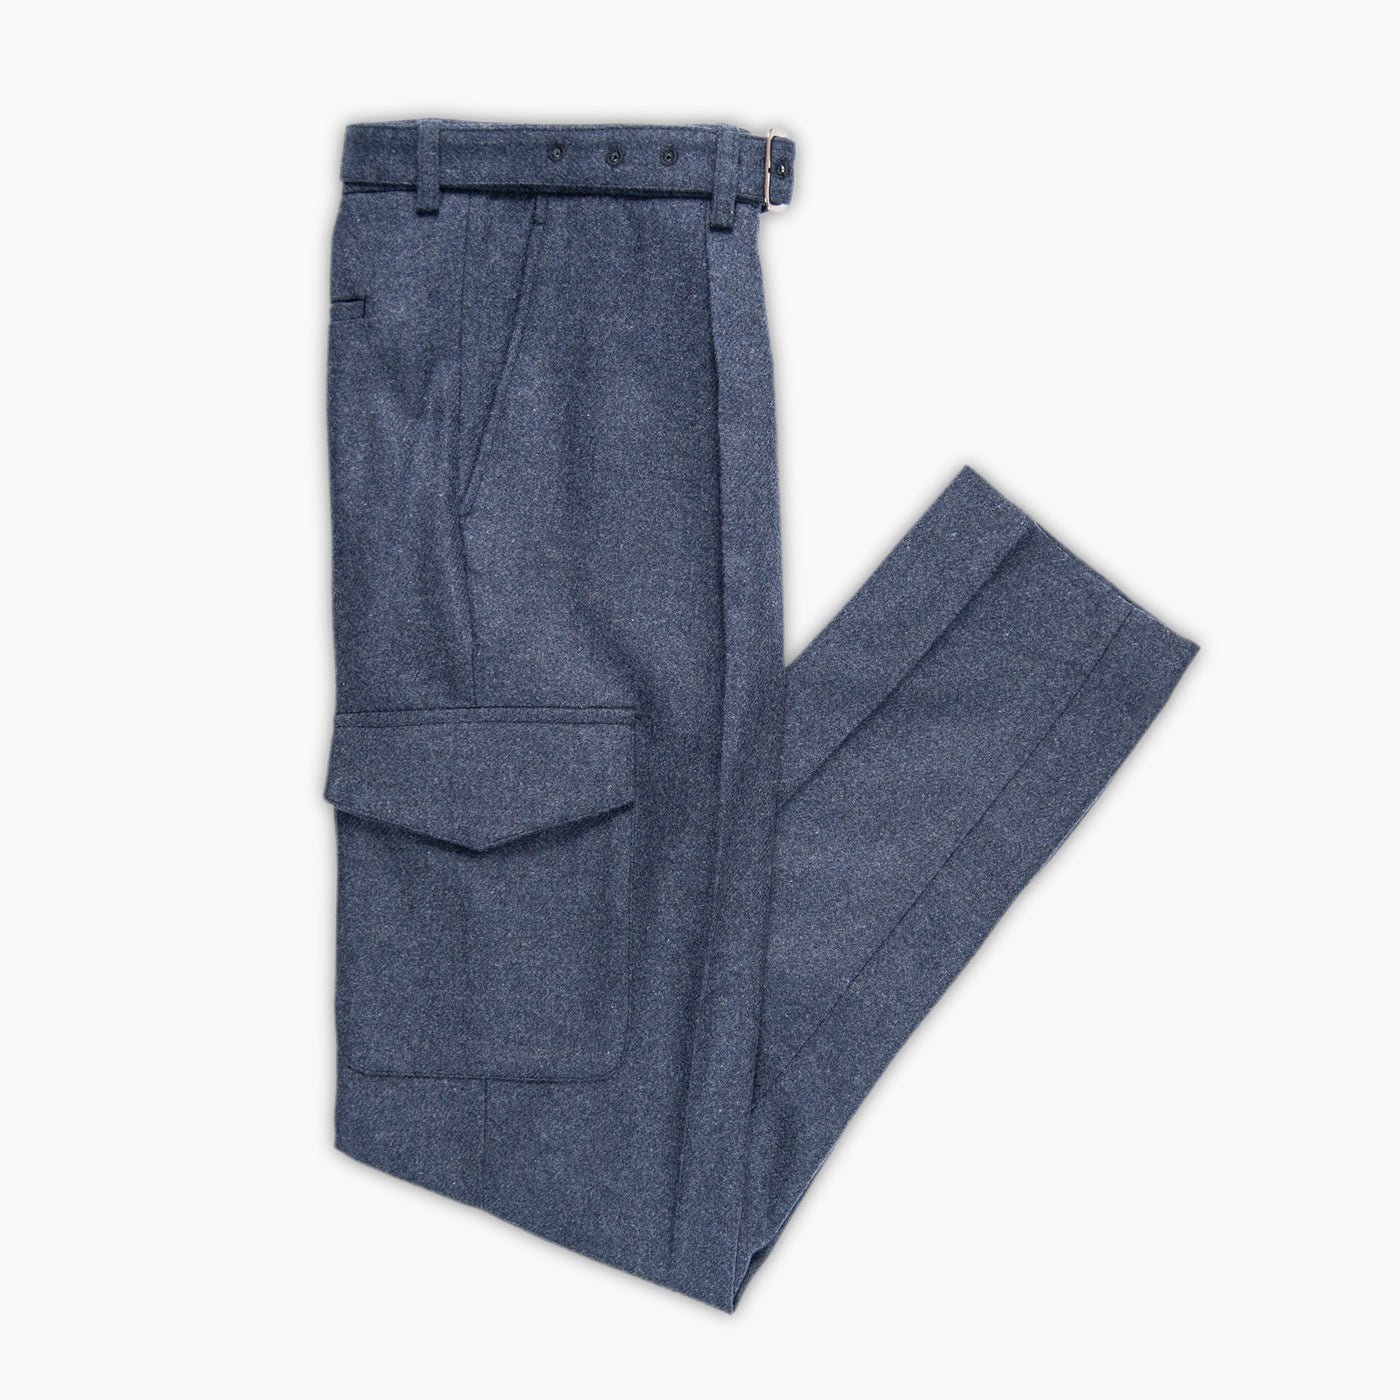 Kasey Honey Way wool cashmere flannel cargo pants